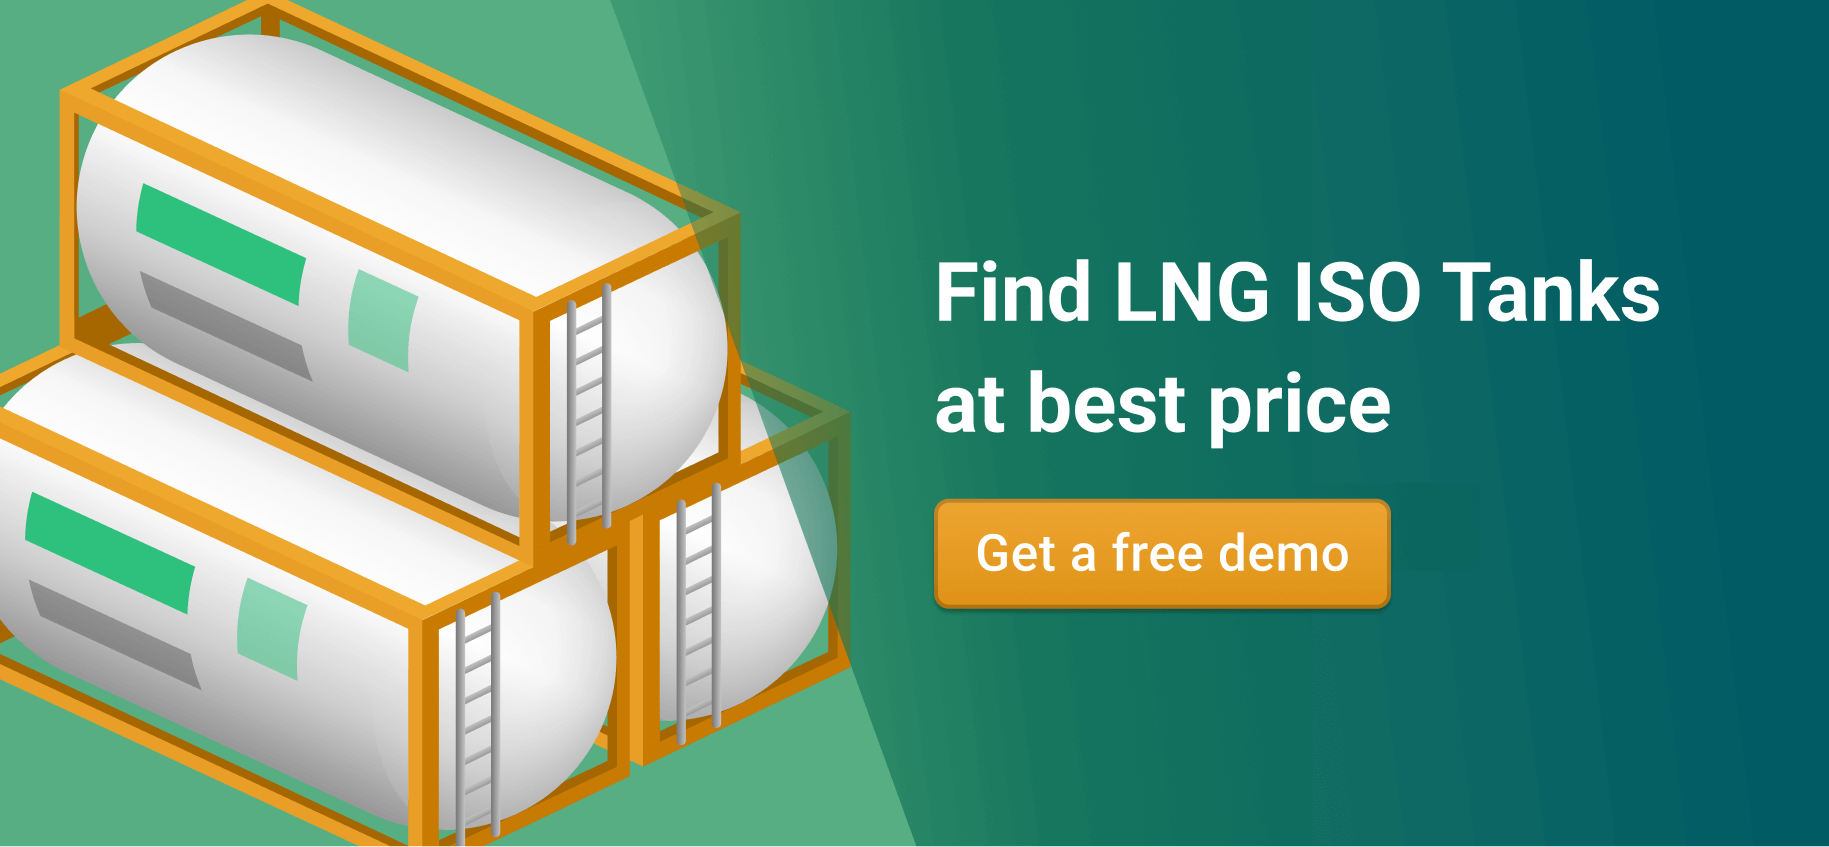 Find LNG ISO tanks